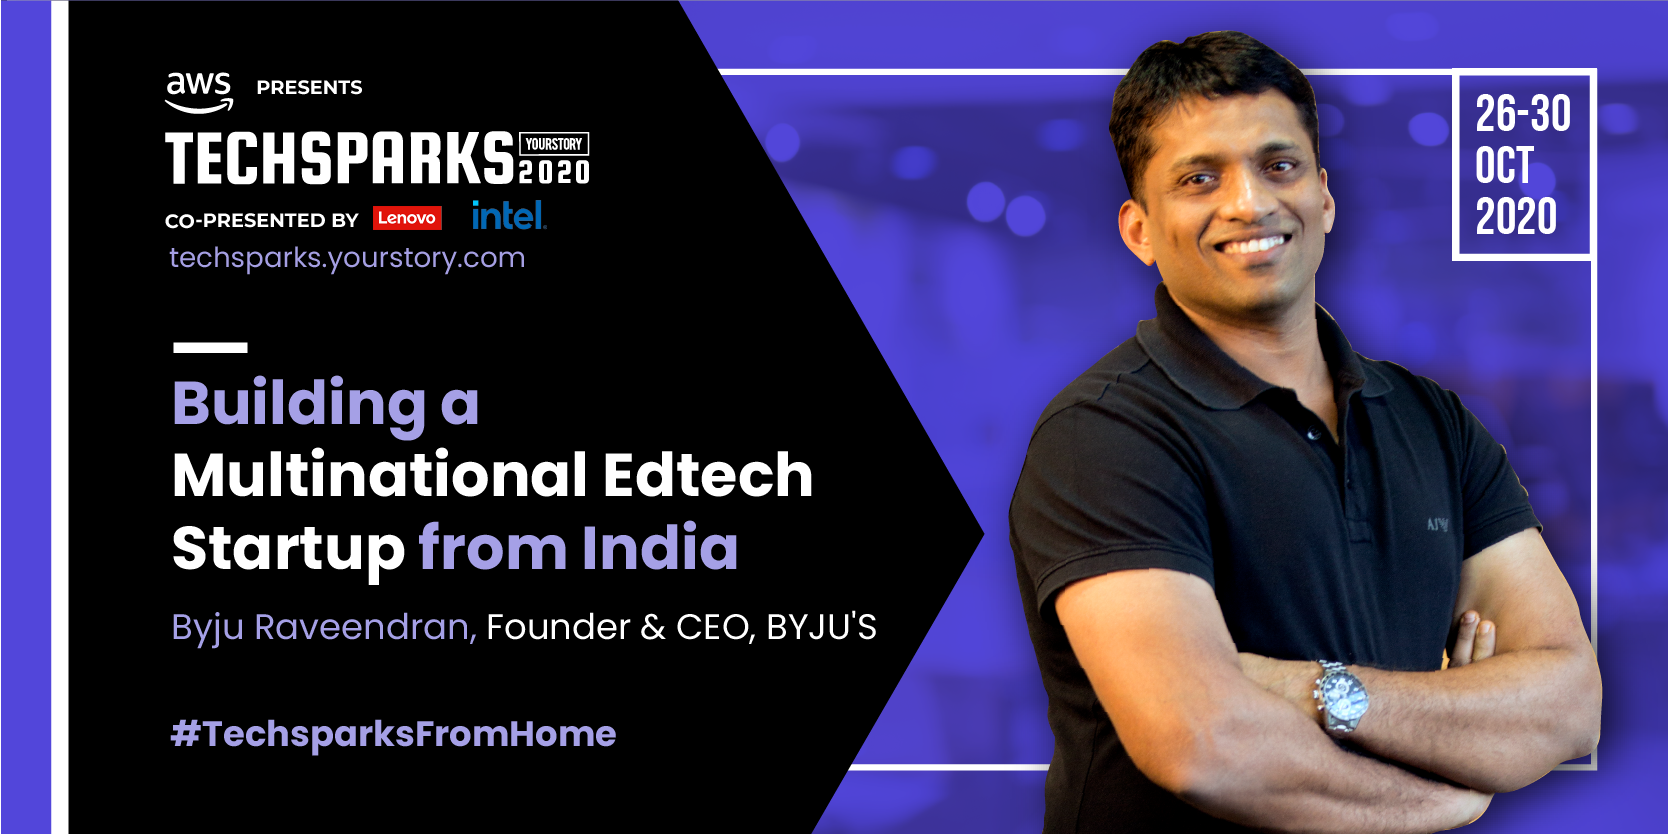 [TechSparks 2020] BYJU’s and WhiteHat Jr. hired over 20,000 employees amid COVID-19; more than 11,000 women are teaching from home